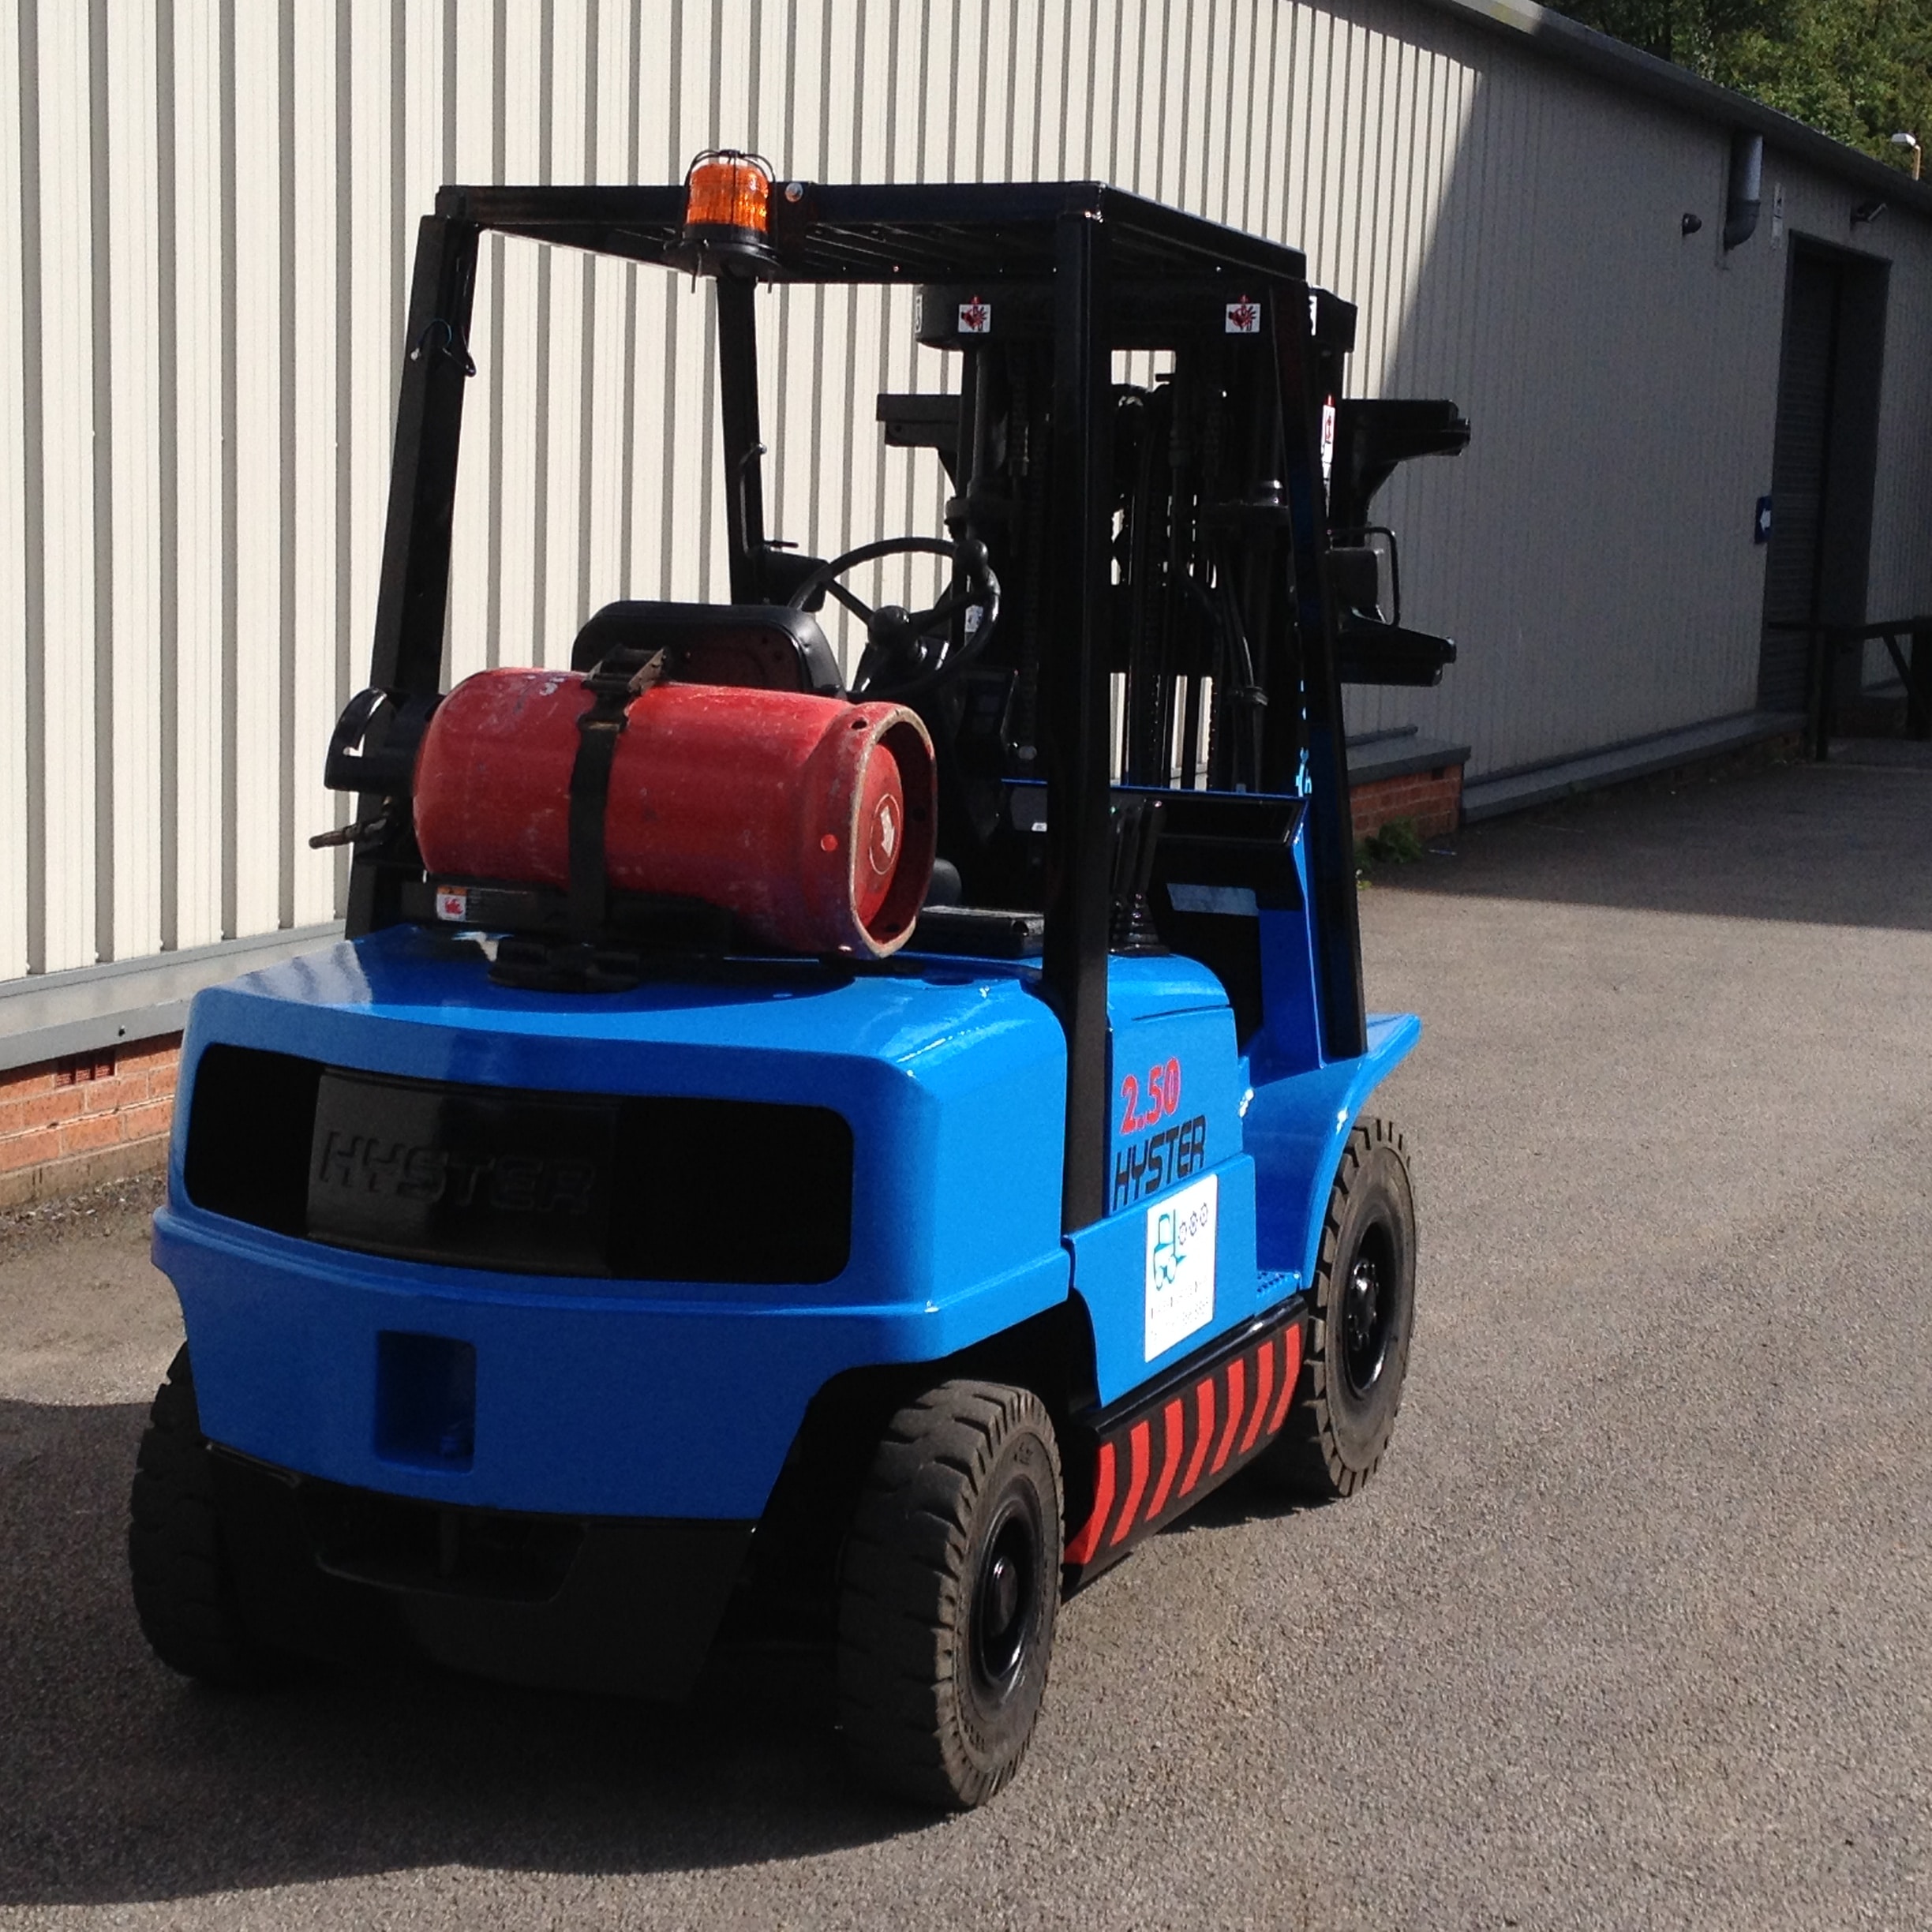 Forklift Truck Hire And Sales Forklift Certification And Used Forklifts Manchester